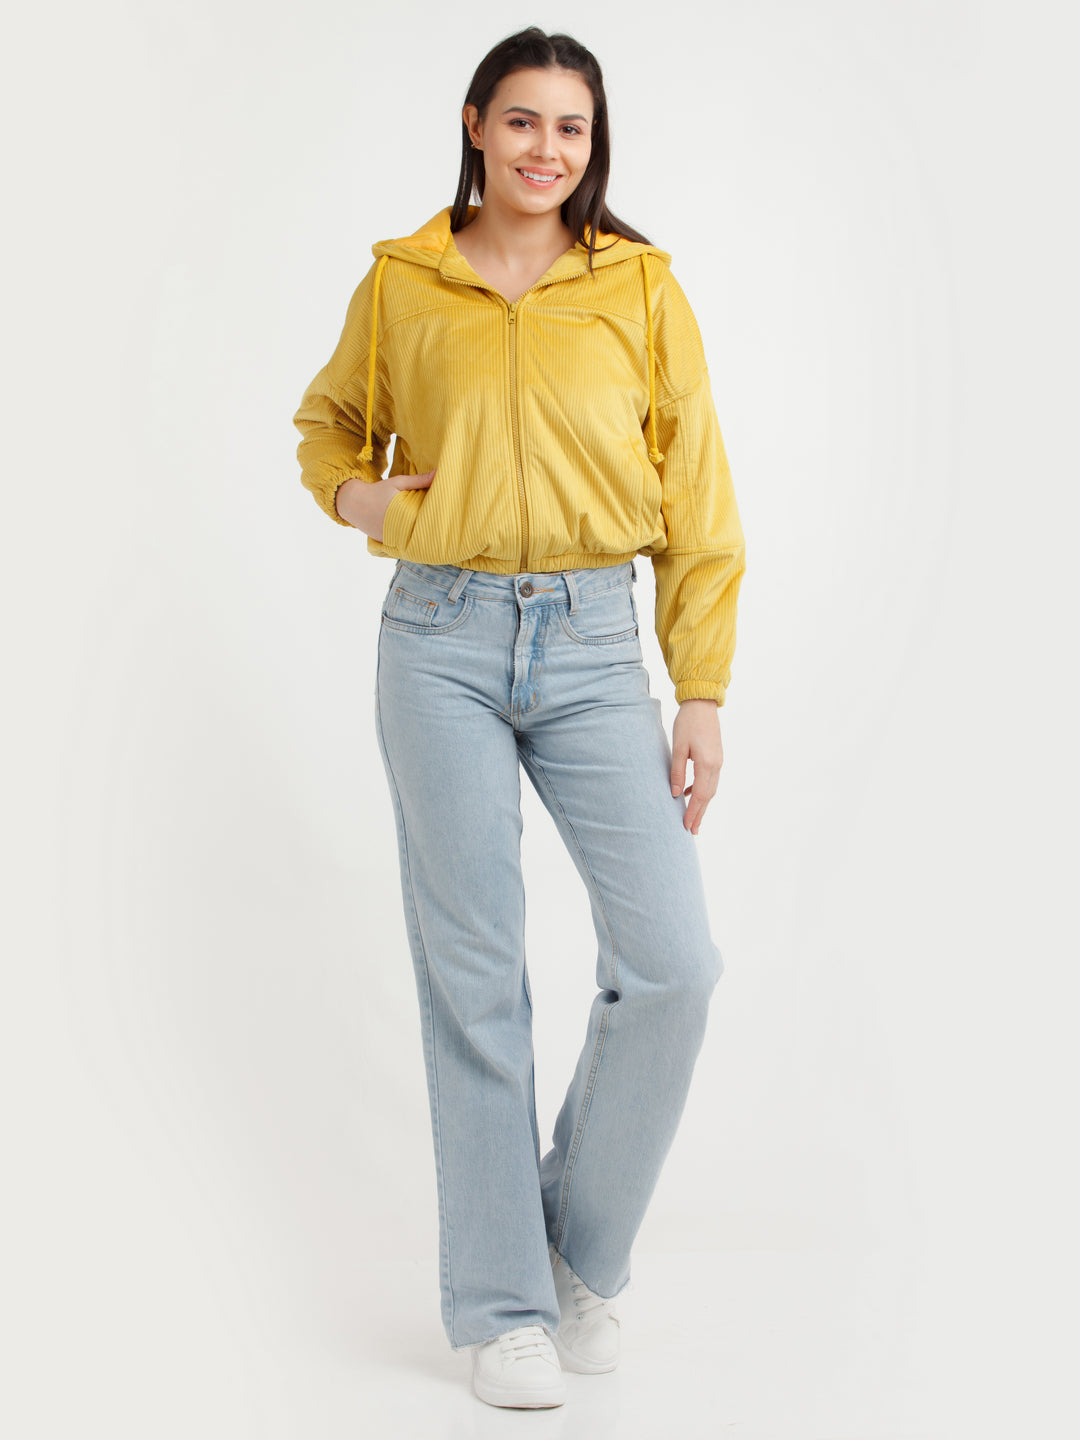 Yellow Solid Jacket For Women